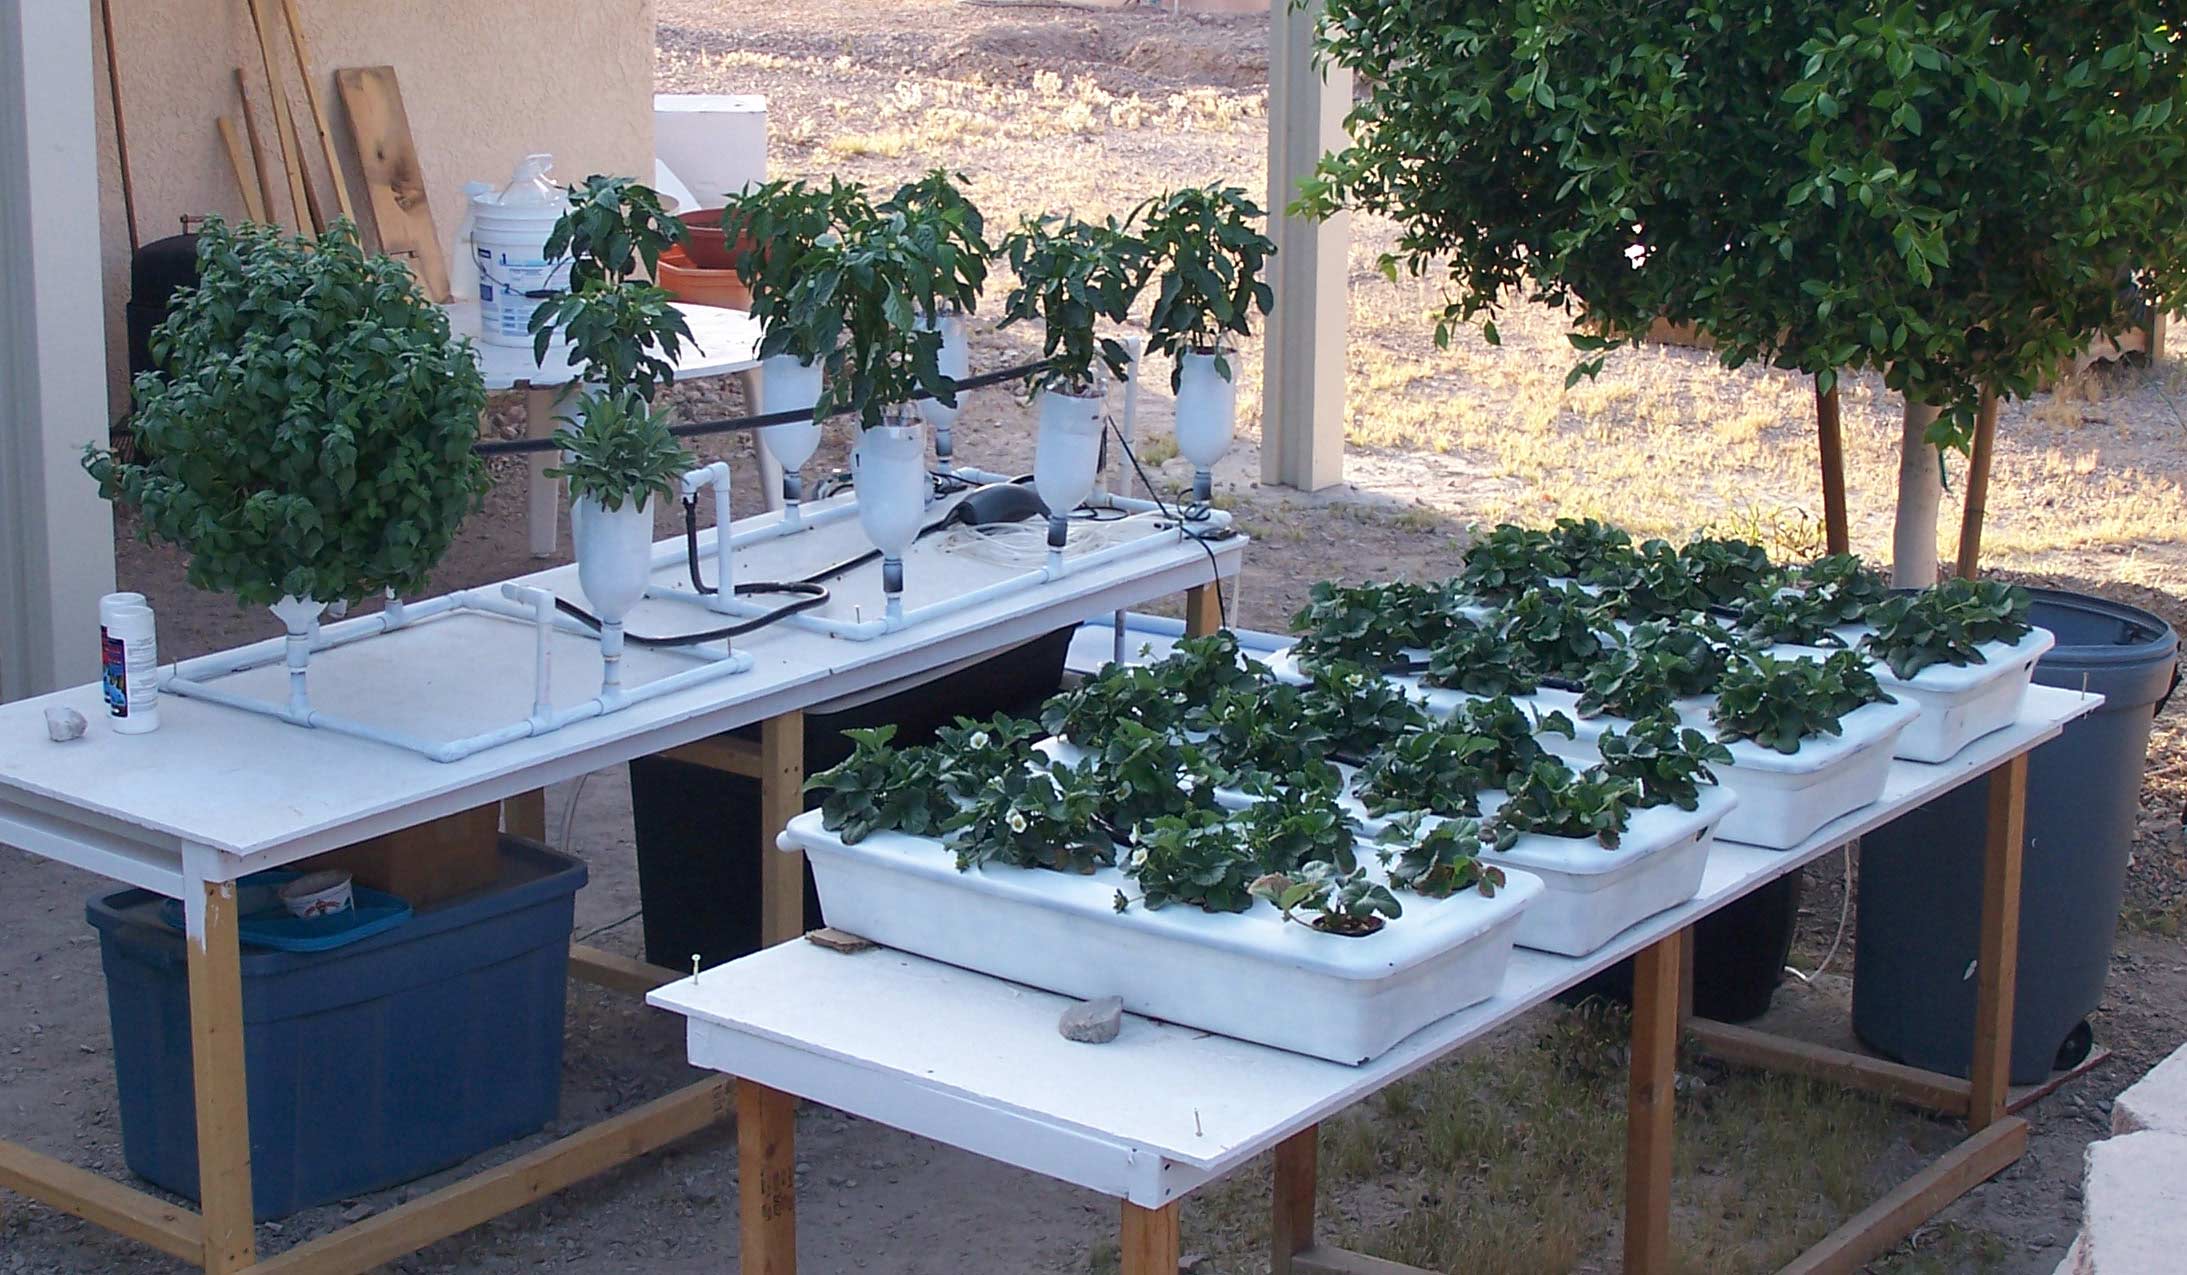 Plants growing in home built hydroponic systems